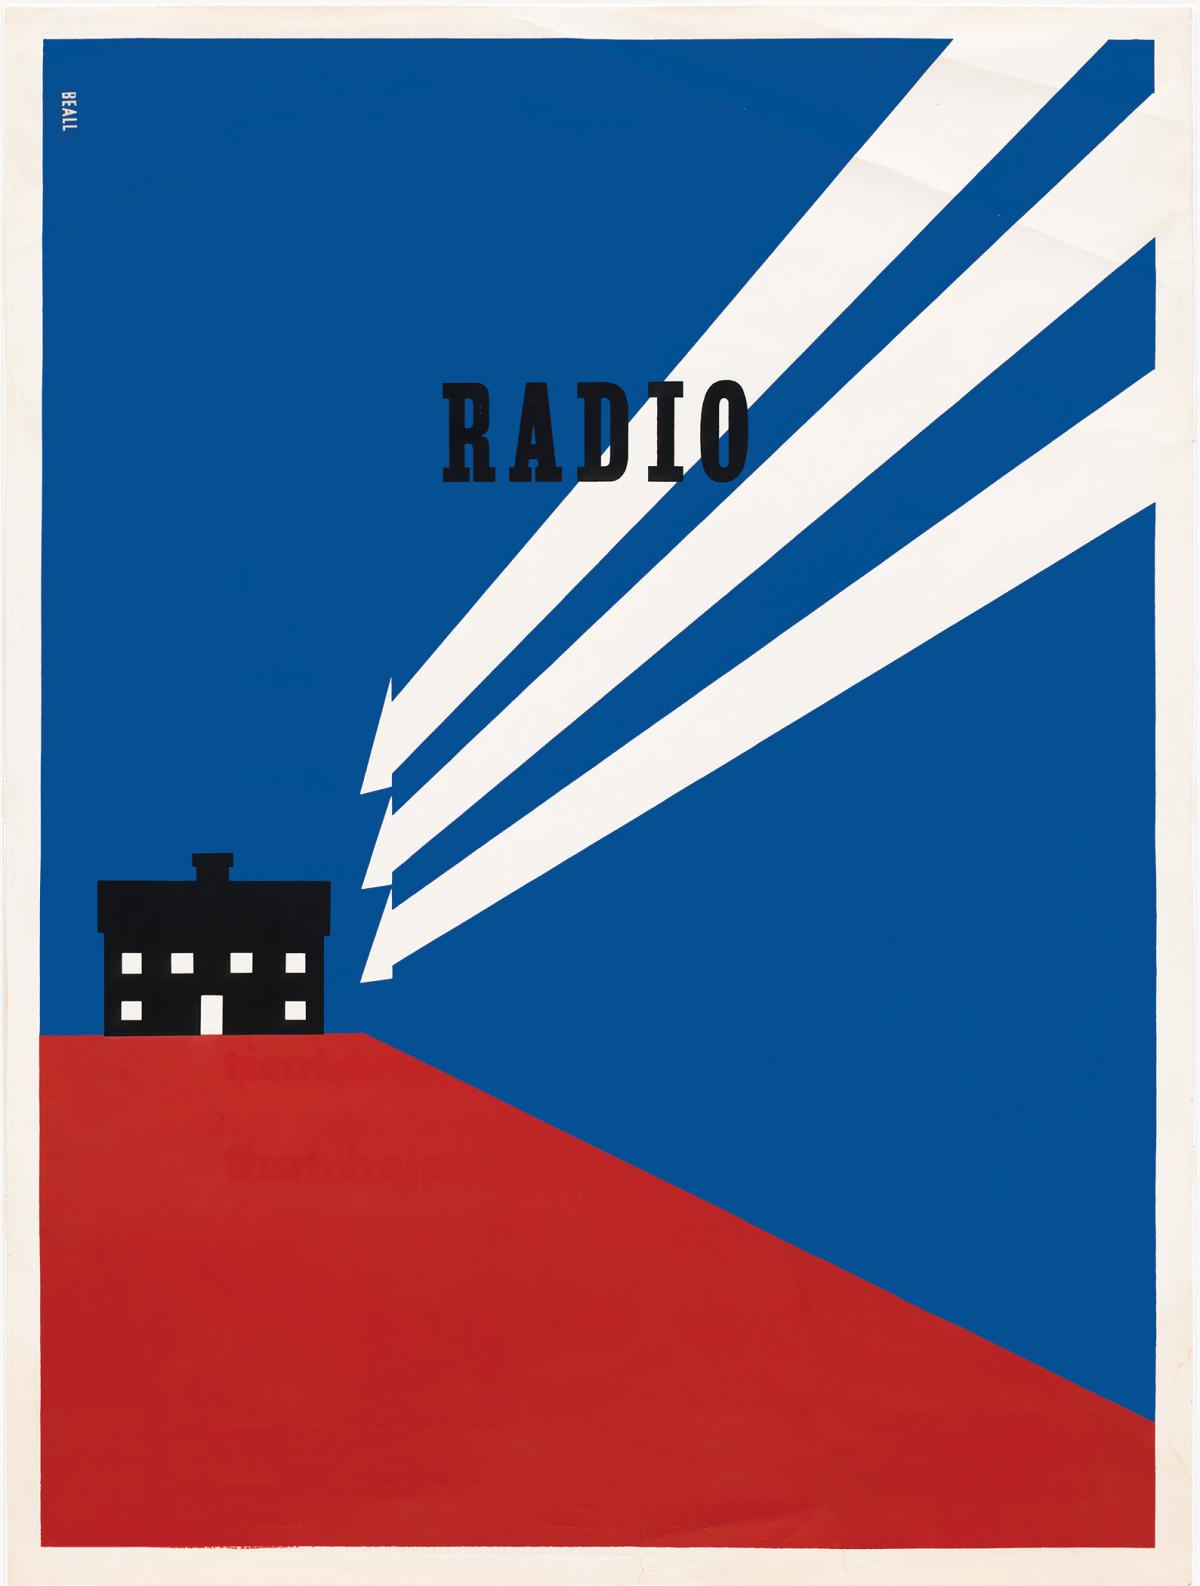 Rural Electrification poster, 1937, showing a black house on a red hill with a blue background, connected to the word "radio" with white lines